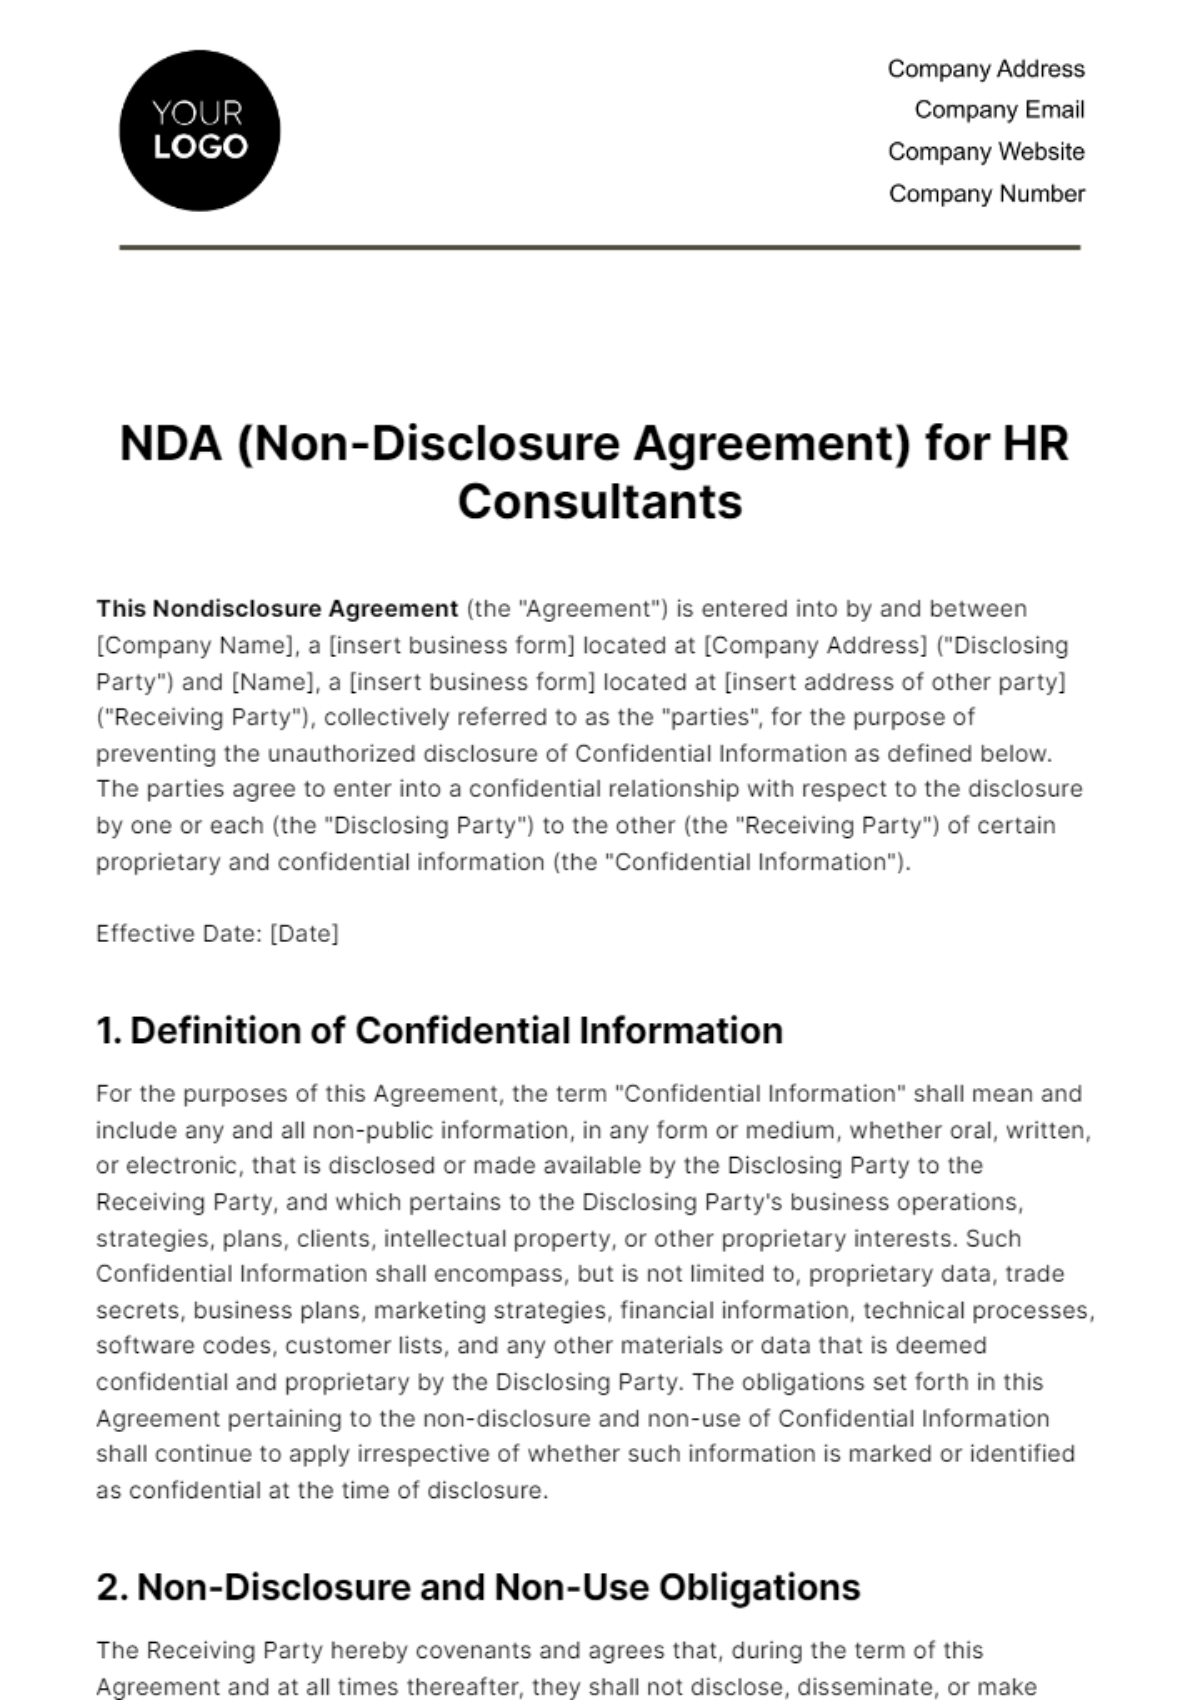 NDA (Non-Disclosure Agreement) for HR Consultants Template